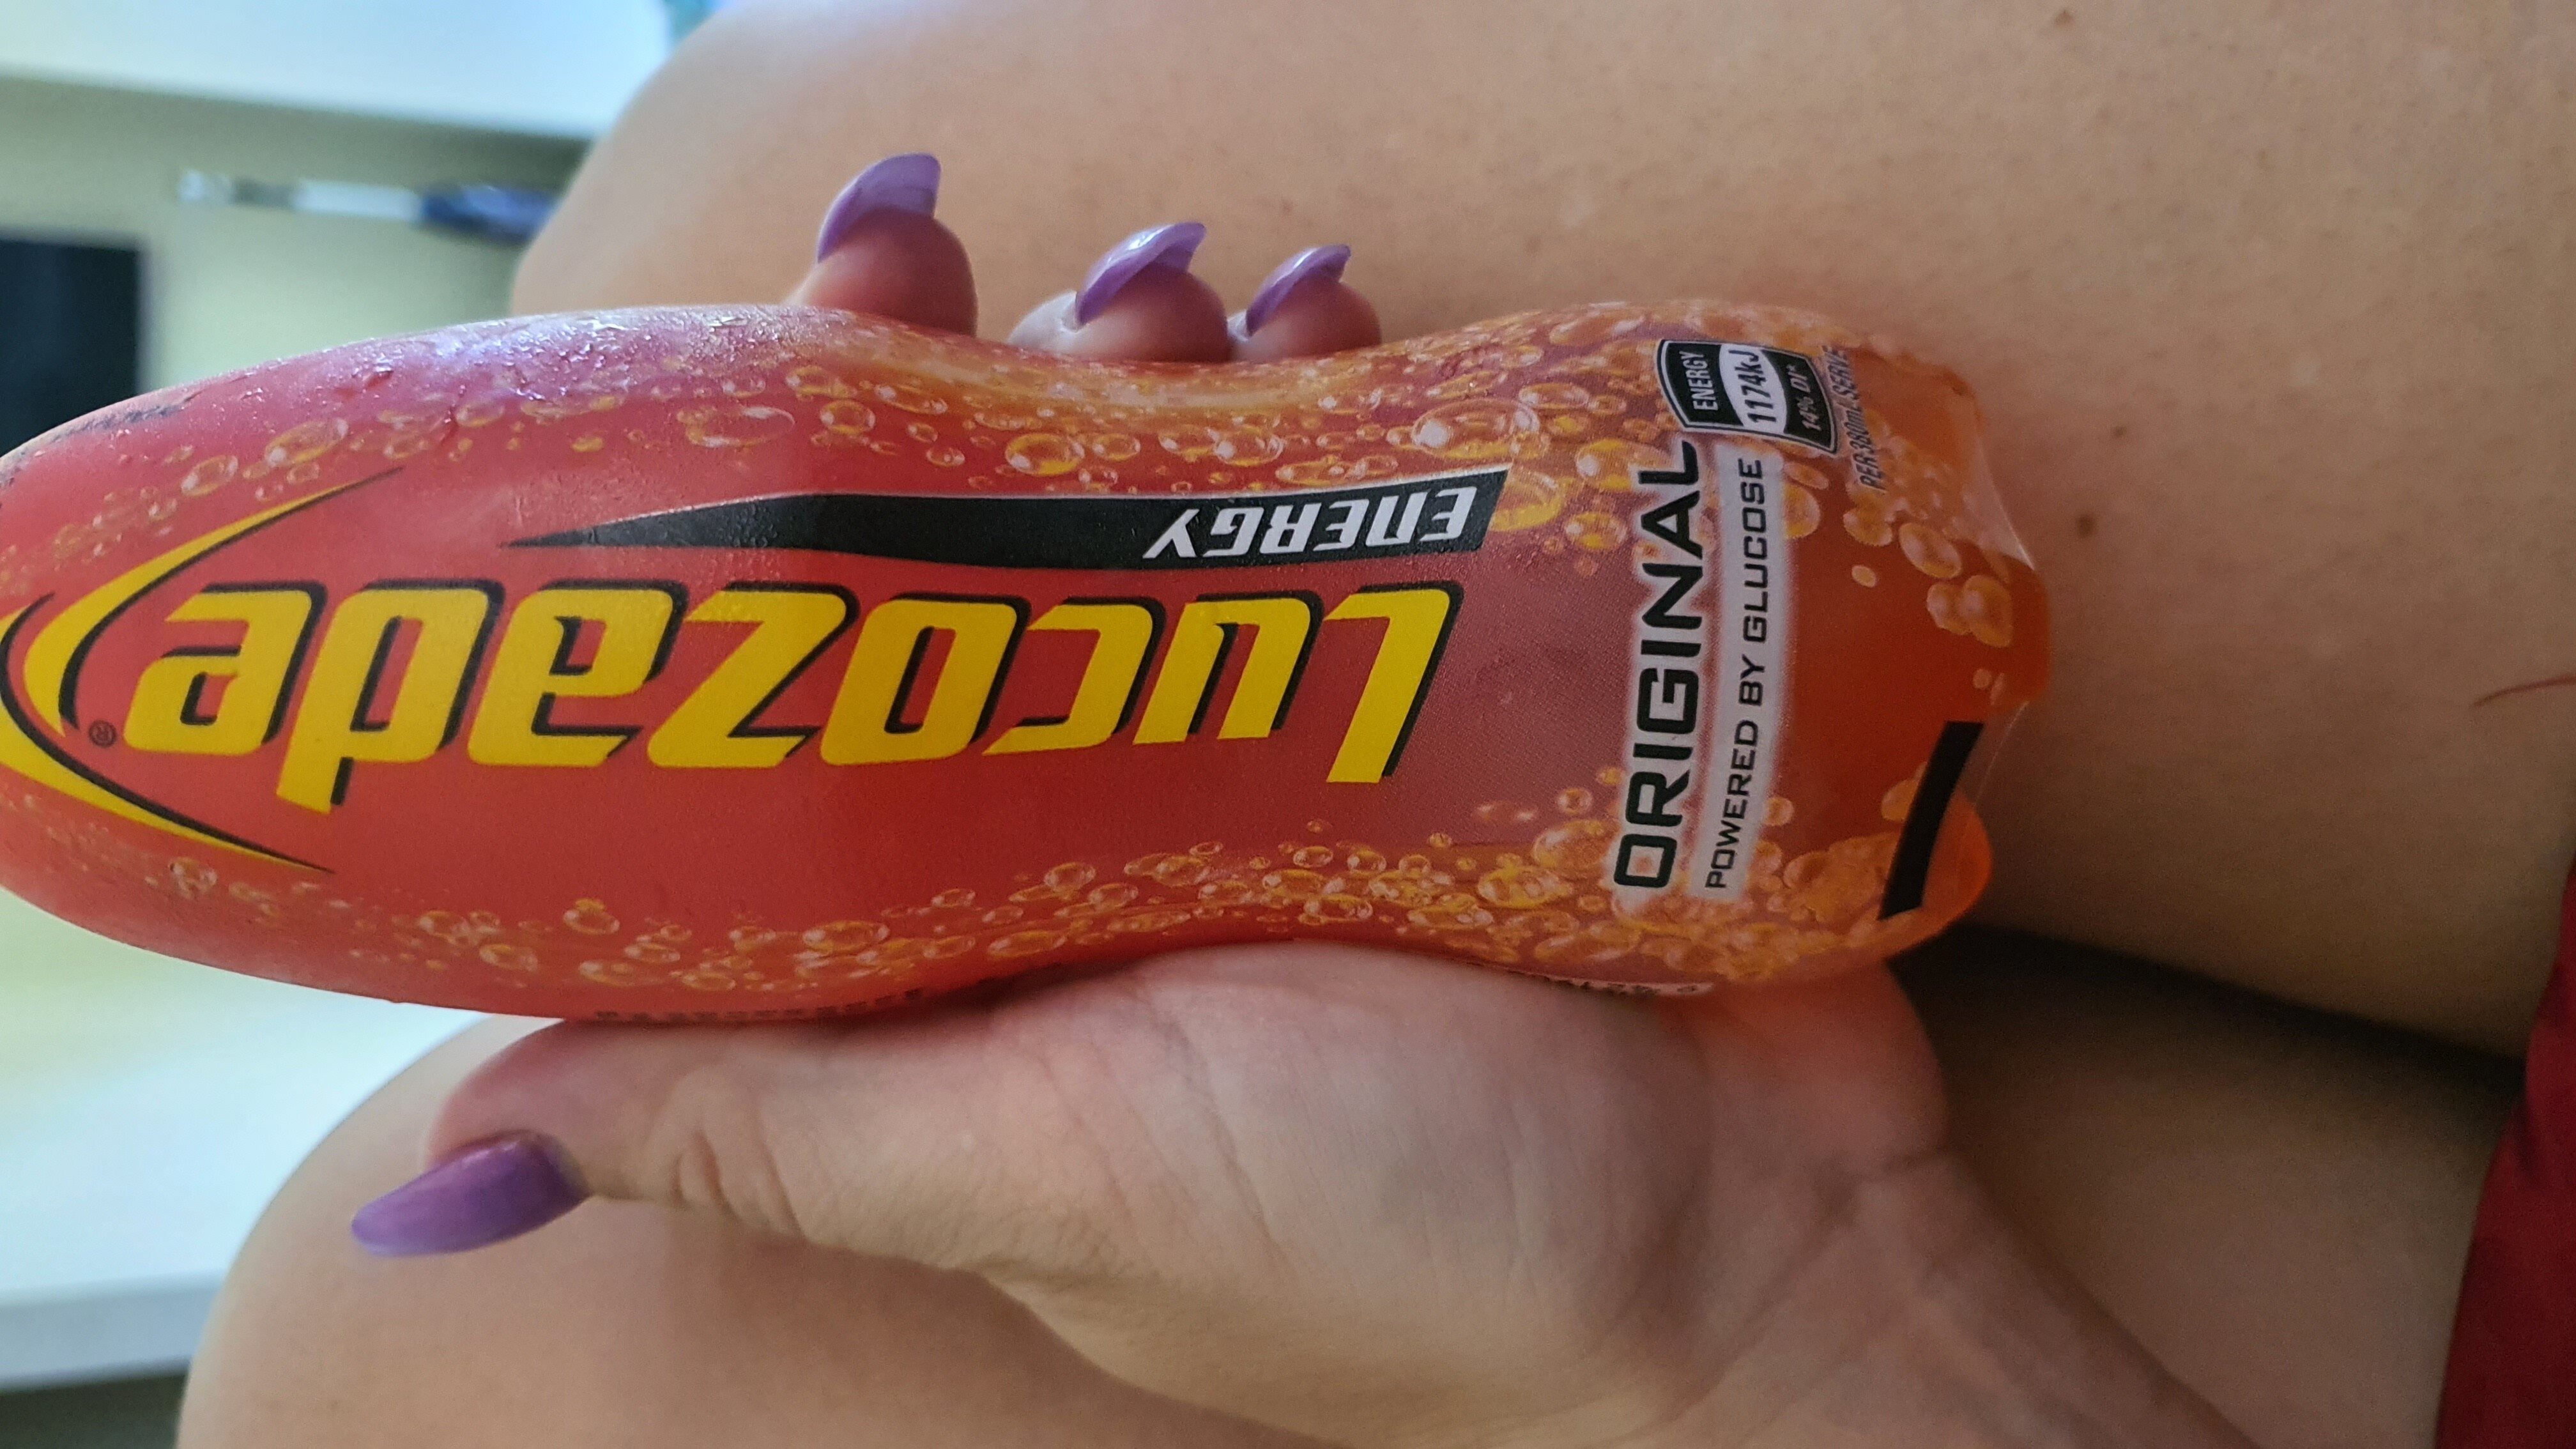 lucozade - Product